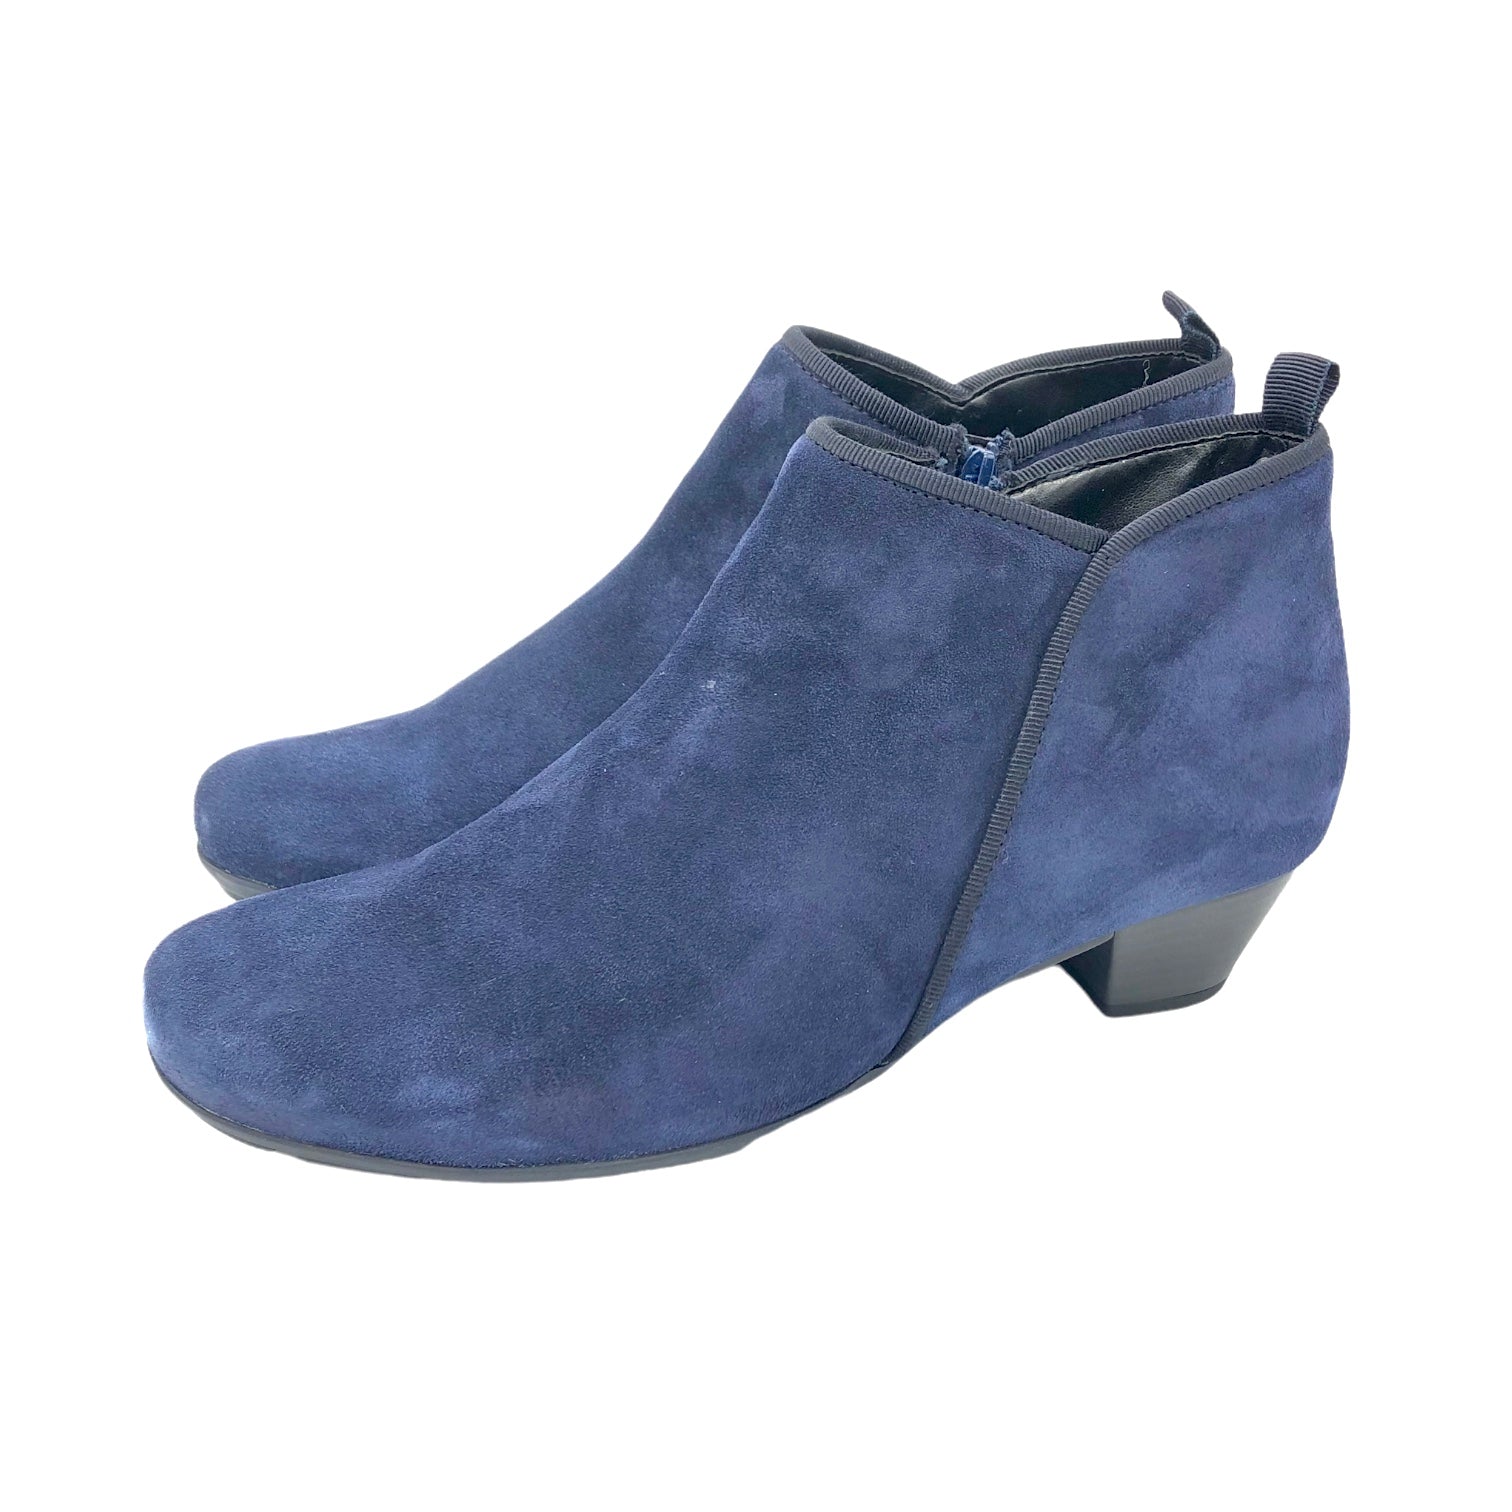 Ministerium Parat Mindst Gabor Trudy soft blue suede leather booties with dressy low heel – Arnouts  Shoes